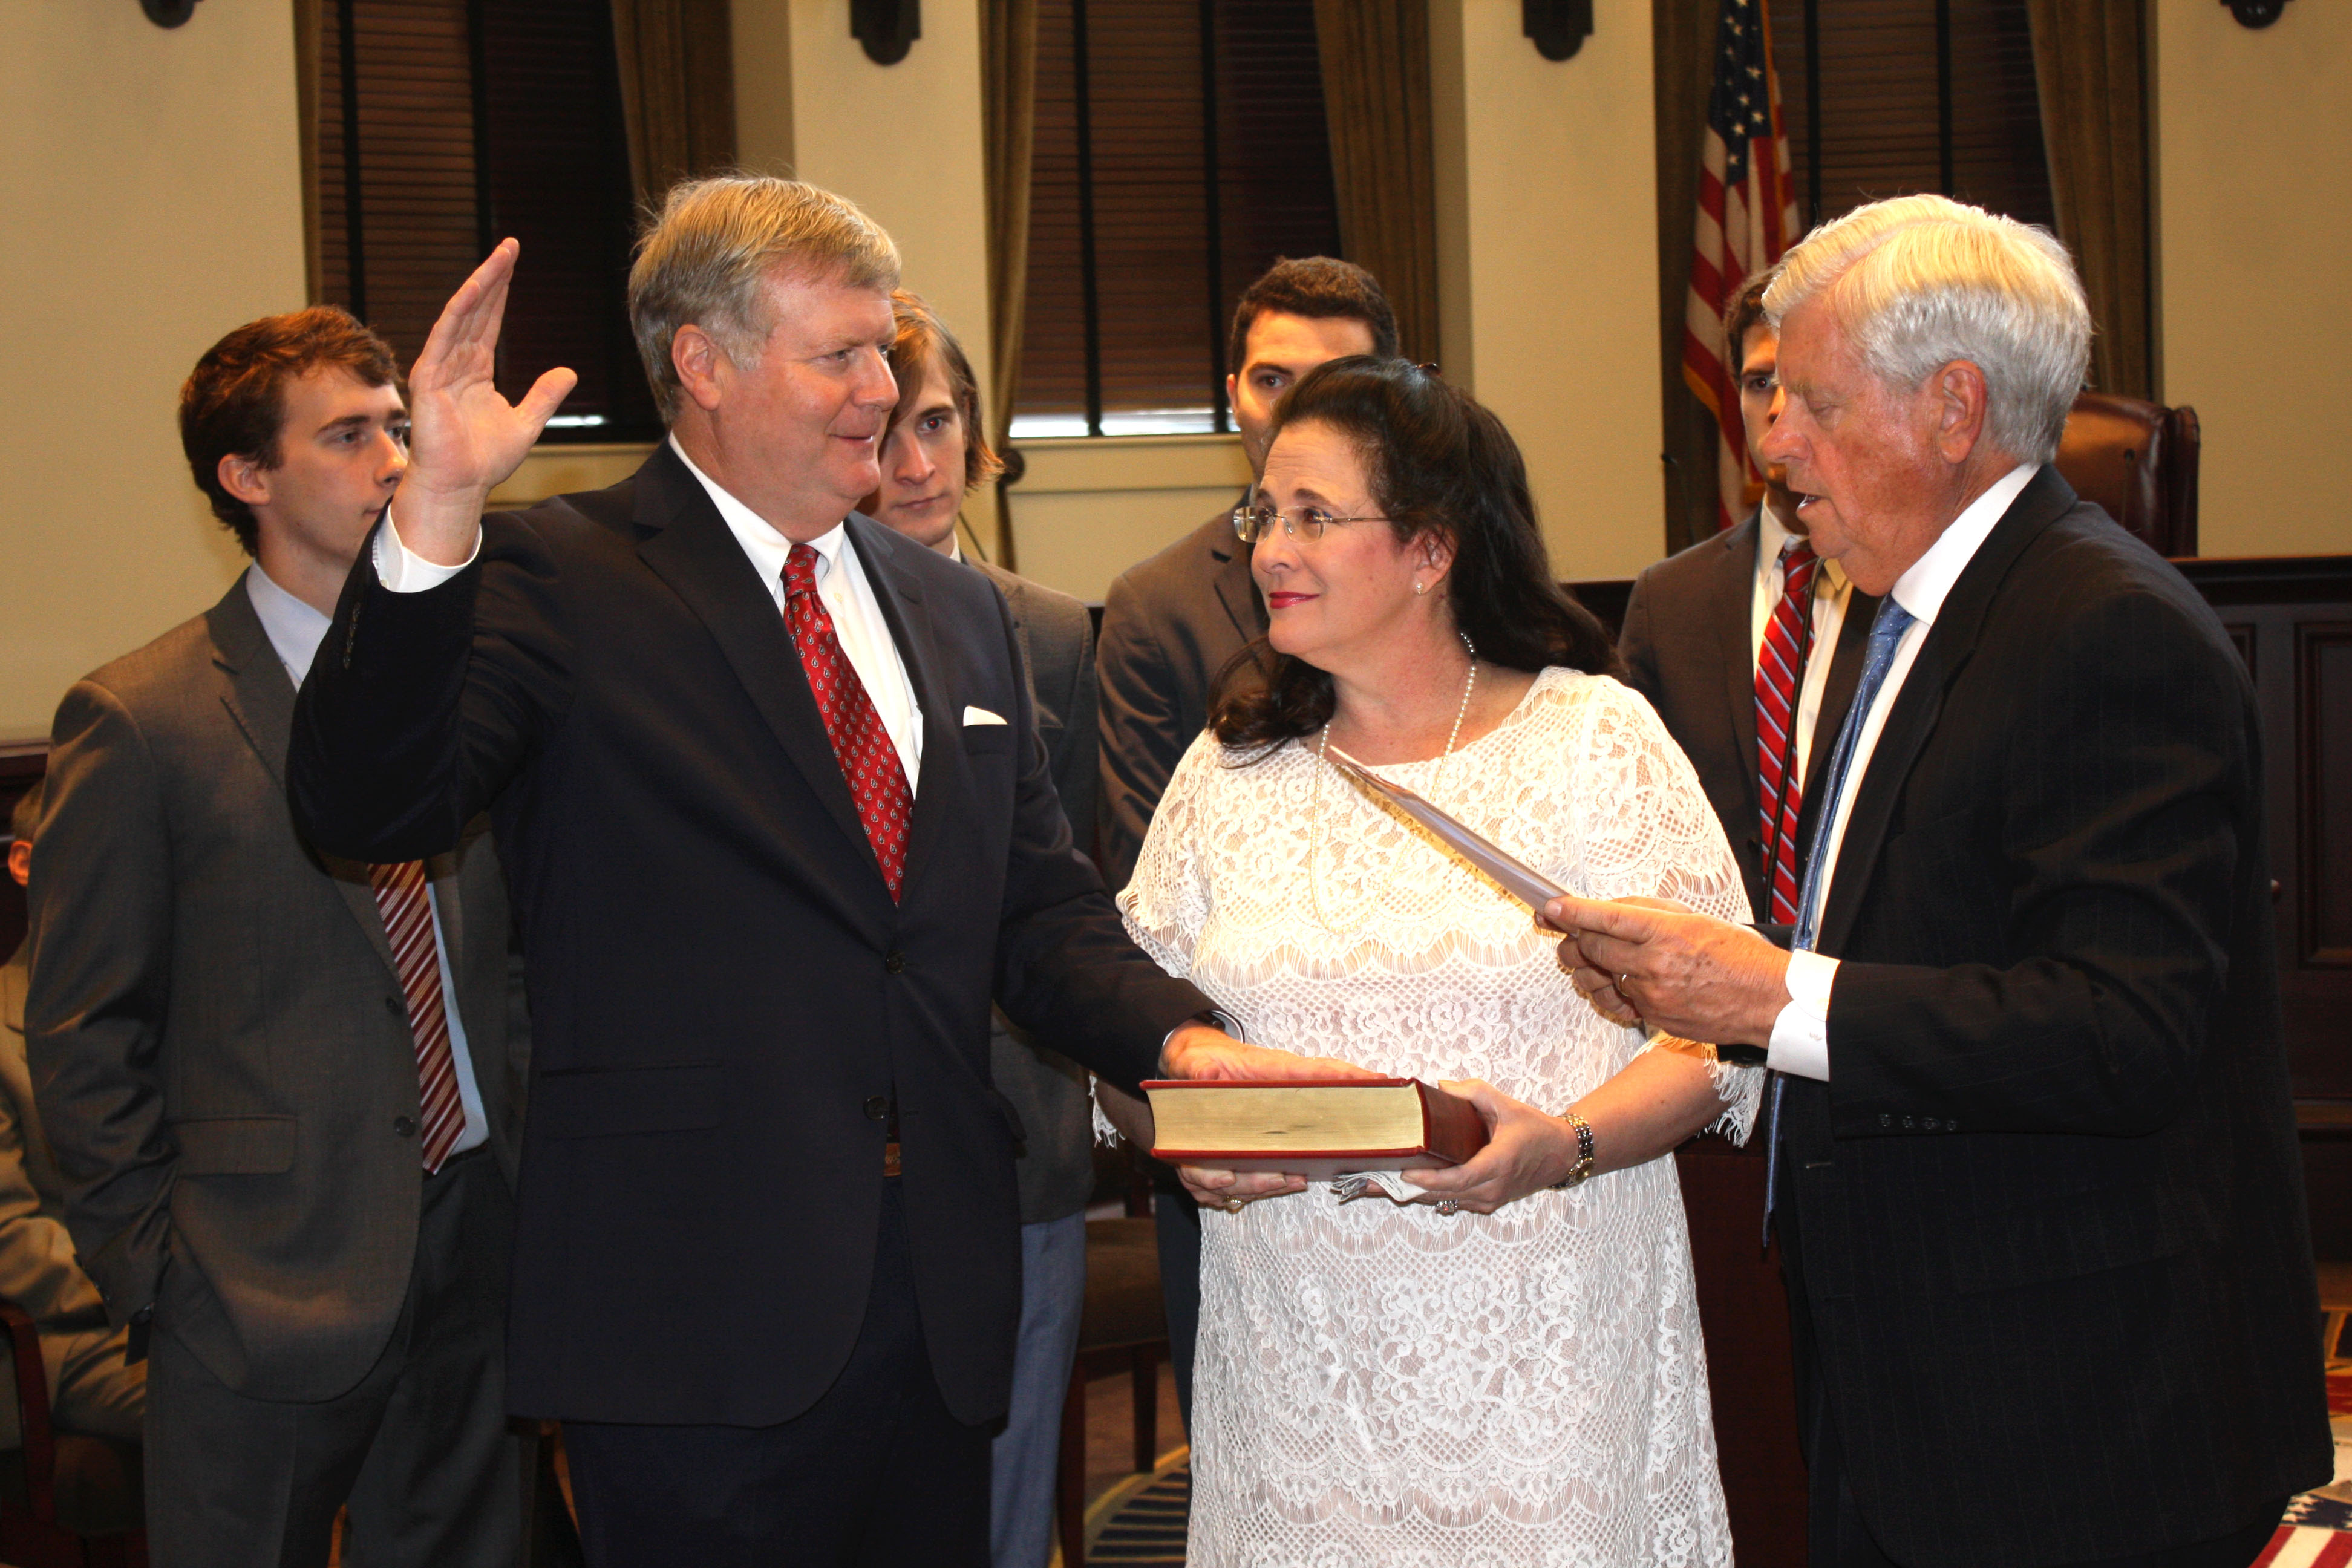 Justice T. Kenneth Griffis Jr. taking the oath of office